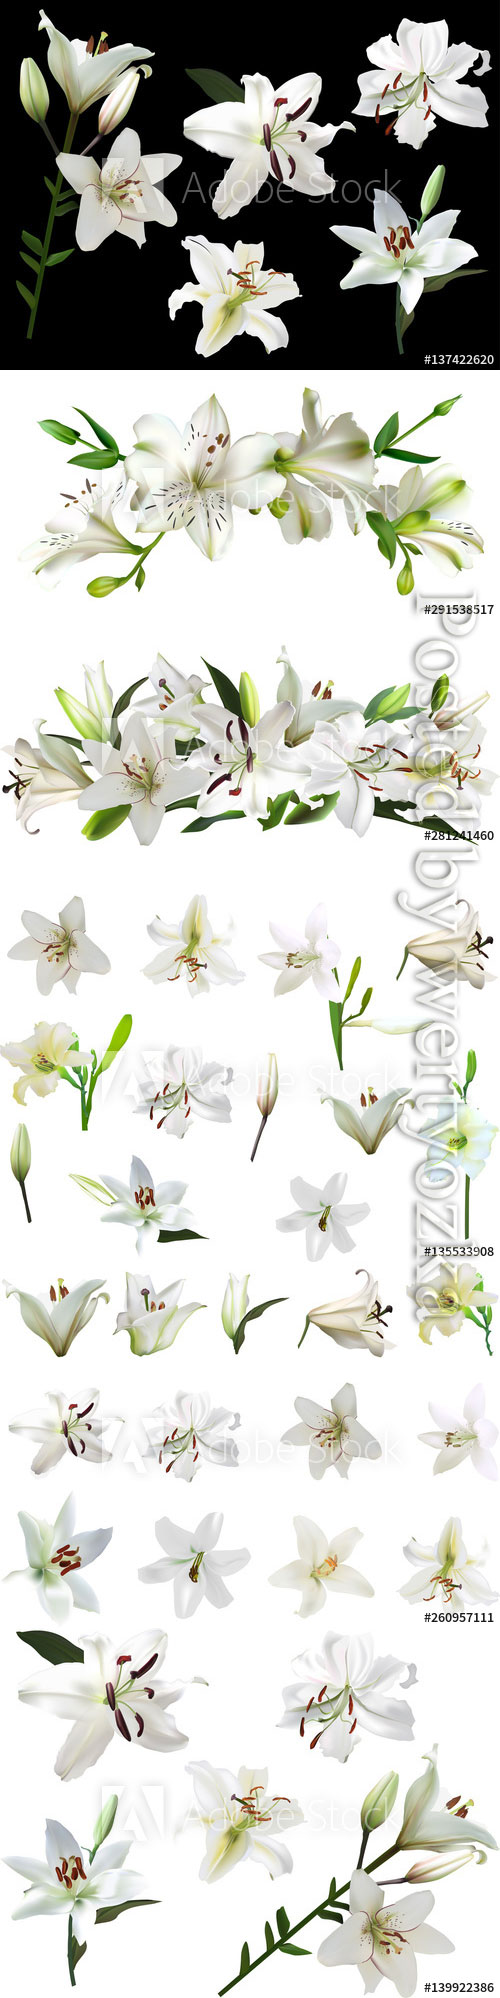 White lilies with green buds, beautiful flowers in vector